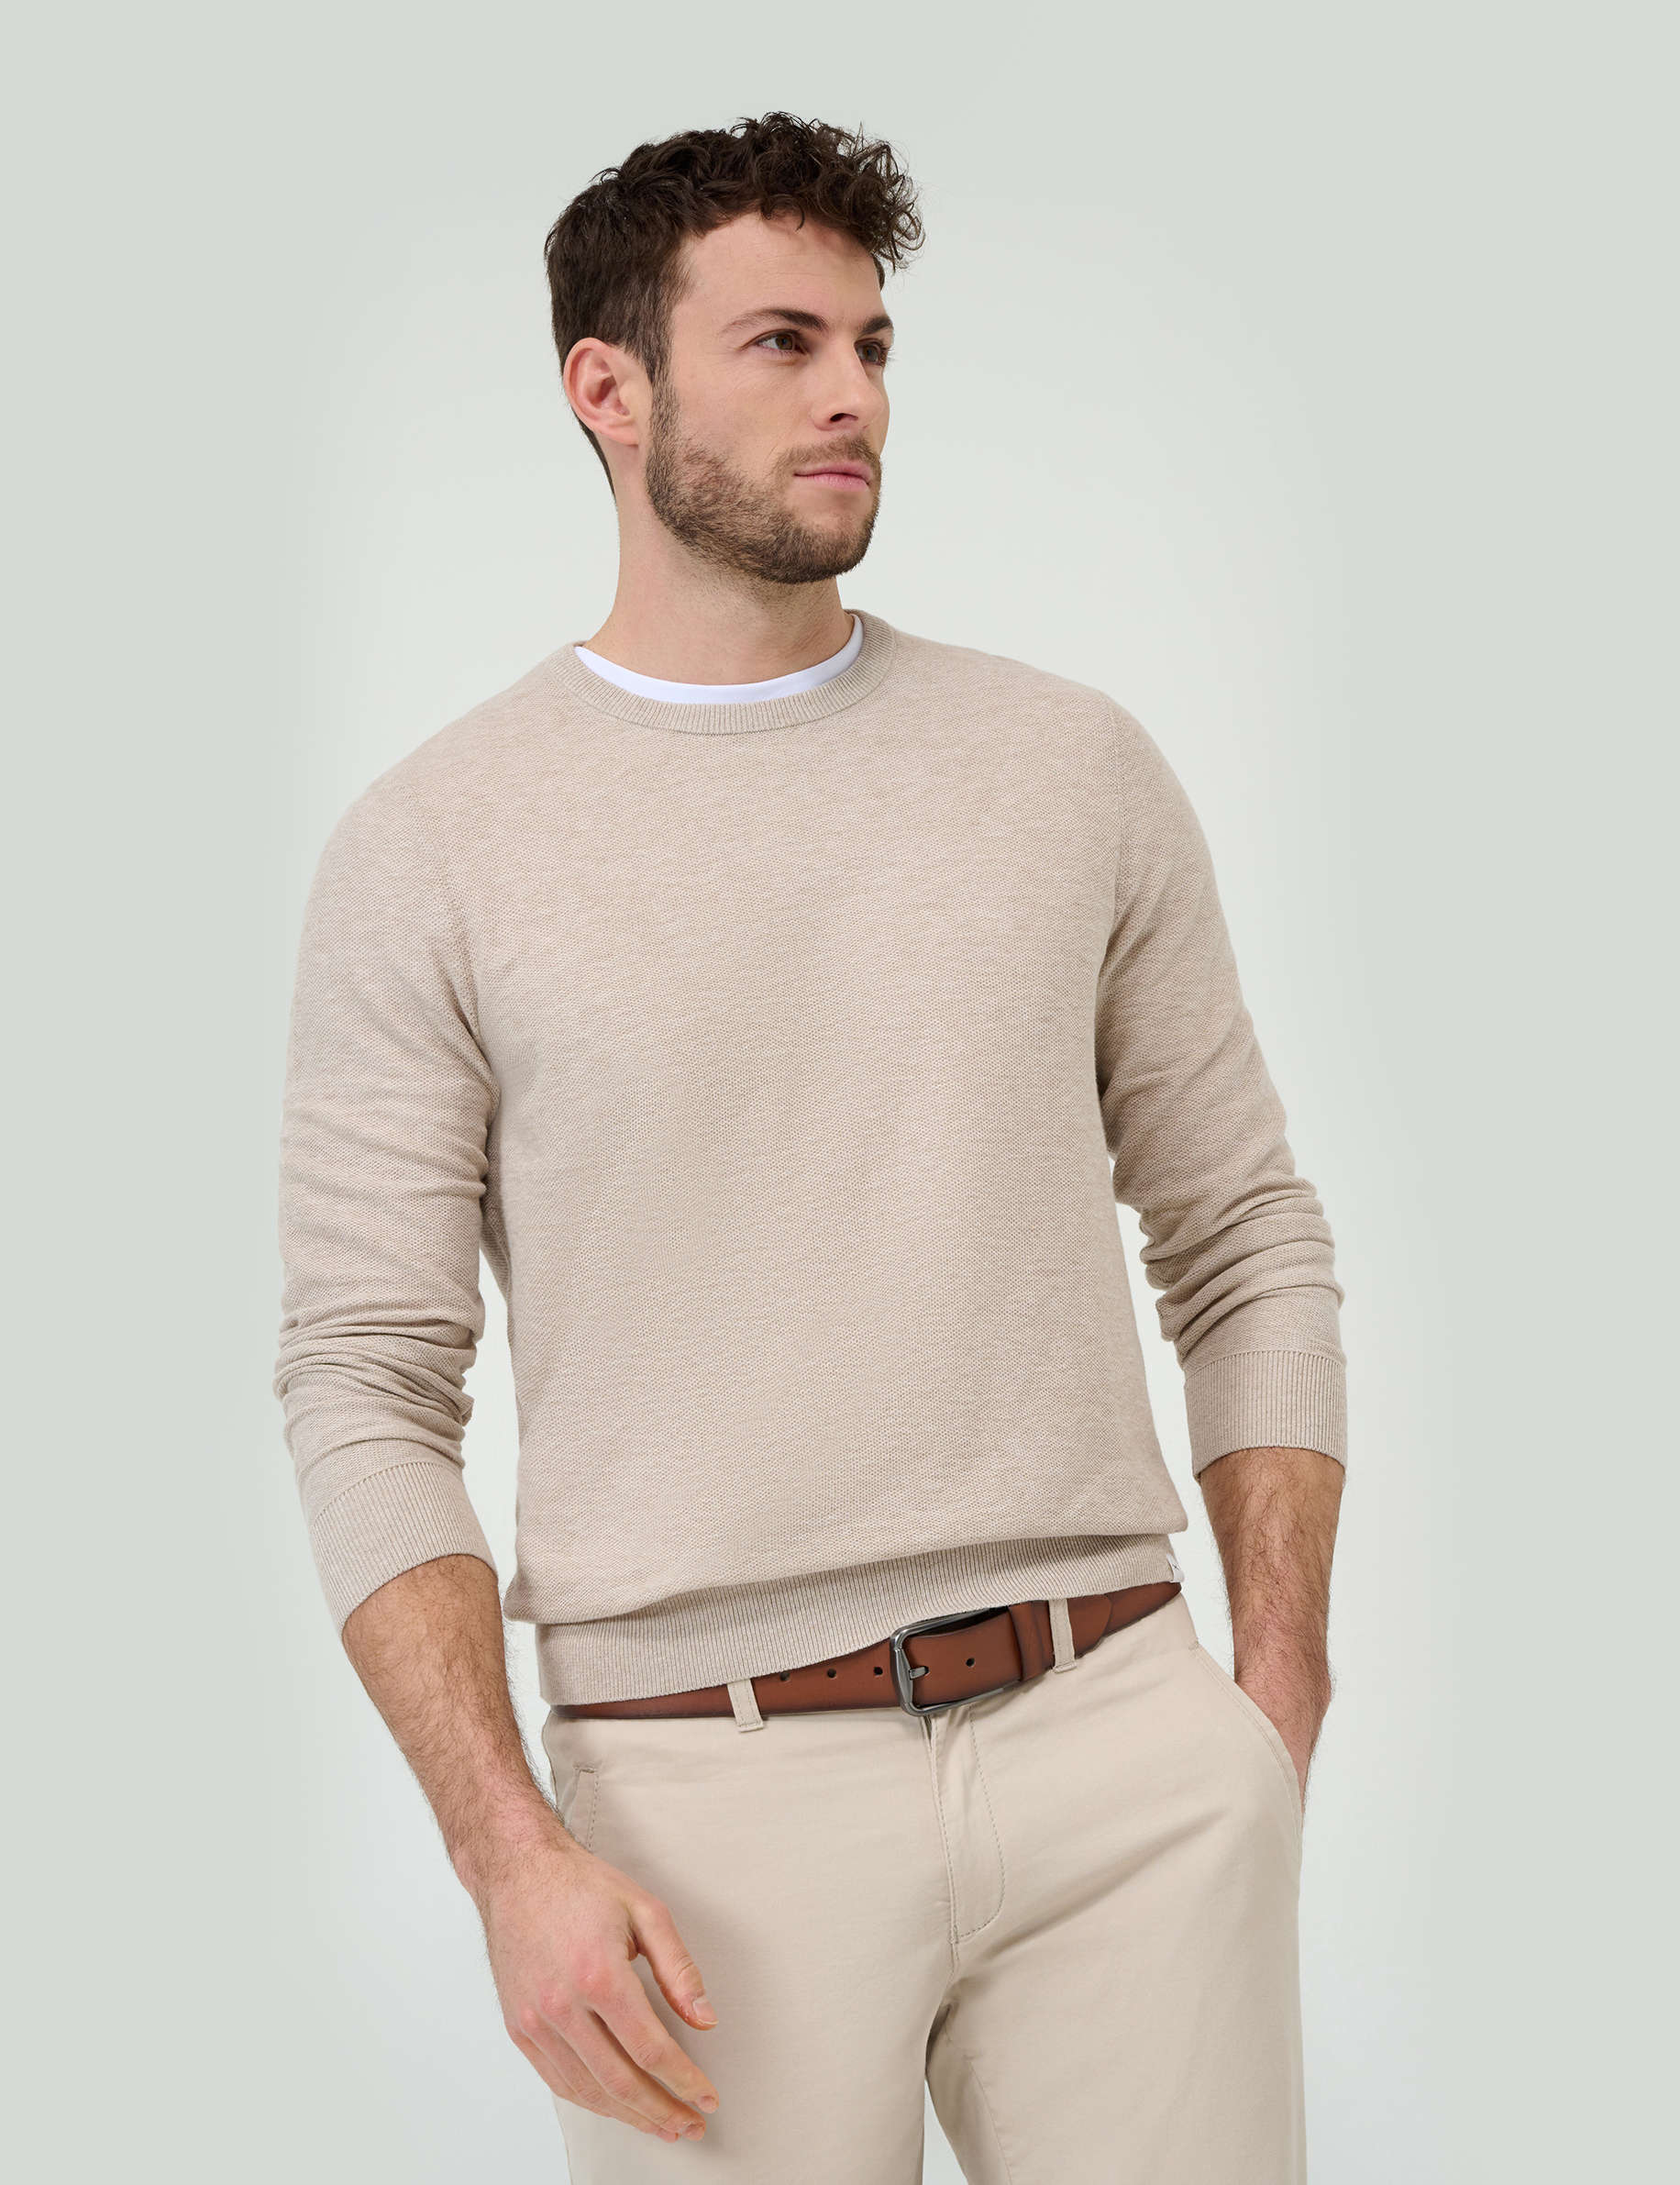 Shades of brown, Men, Style RICK, MODEL_FRONT_ISHOP